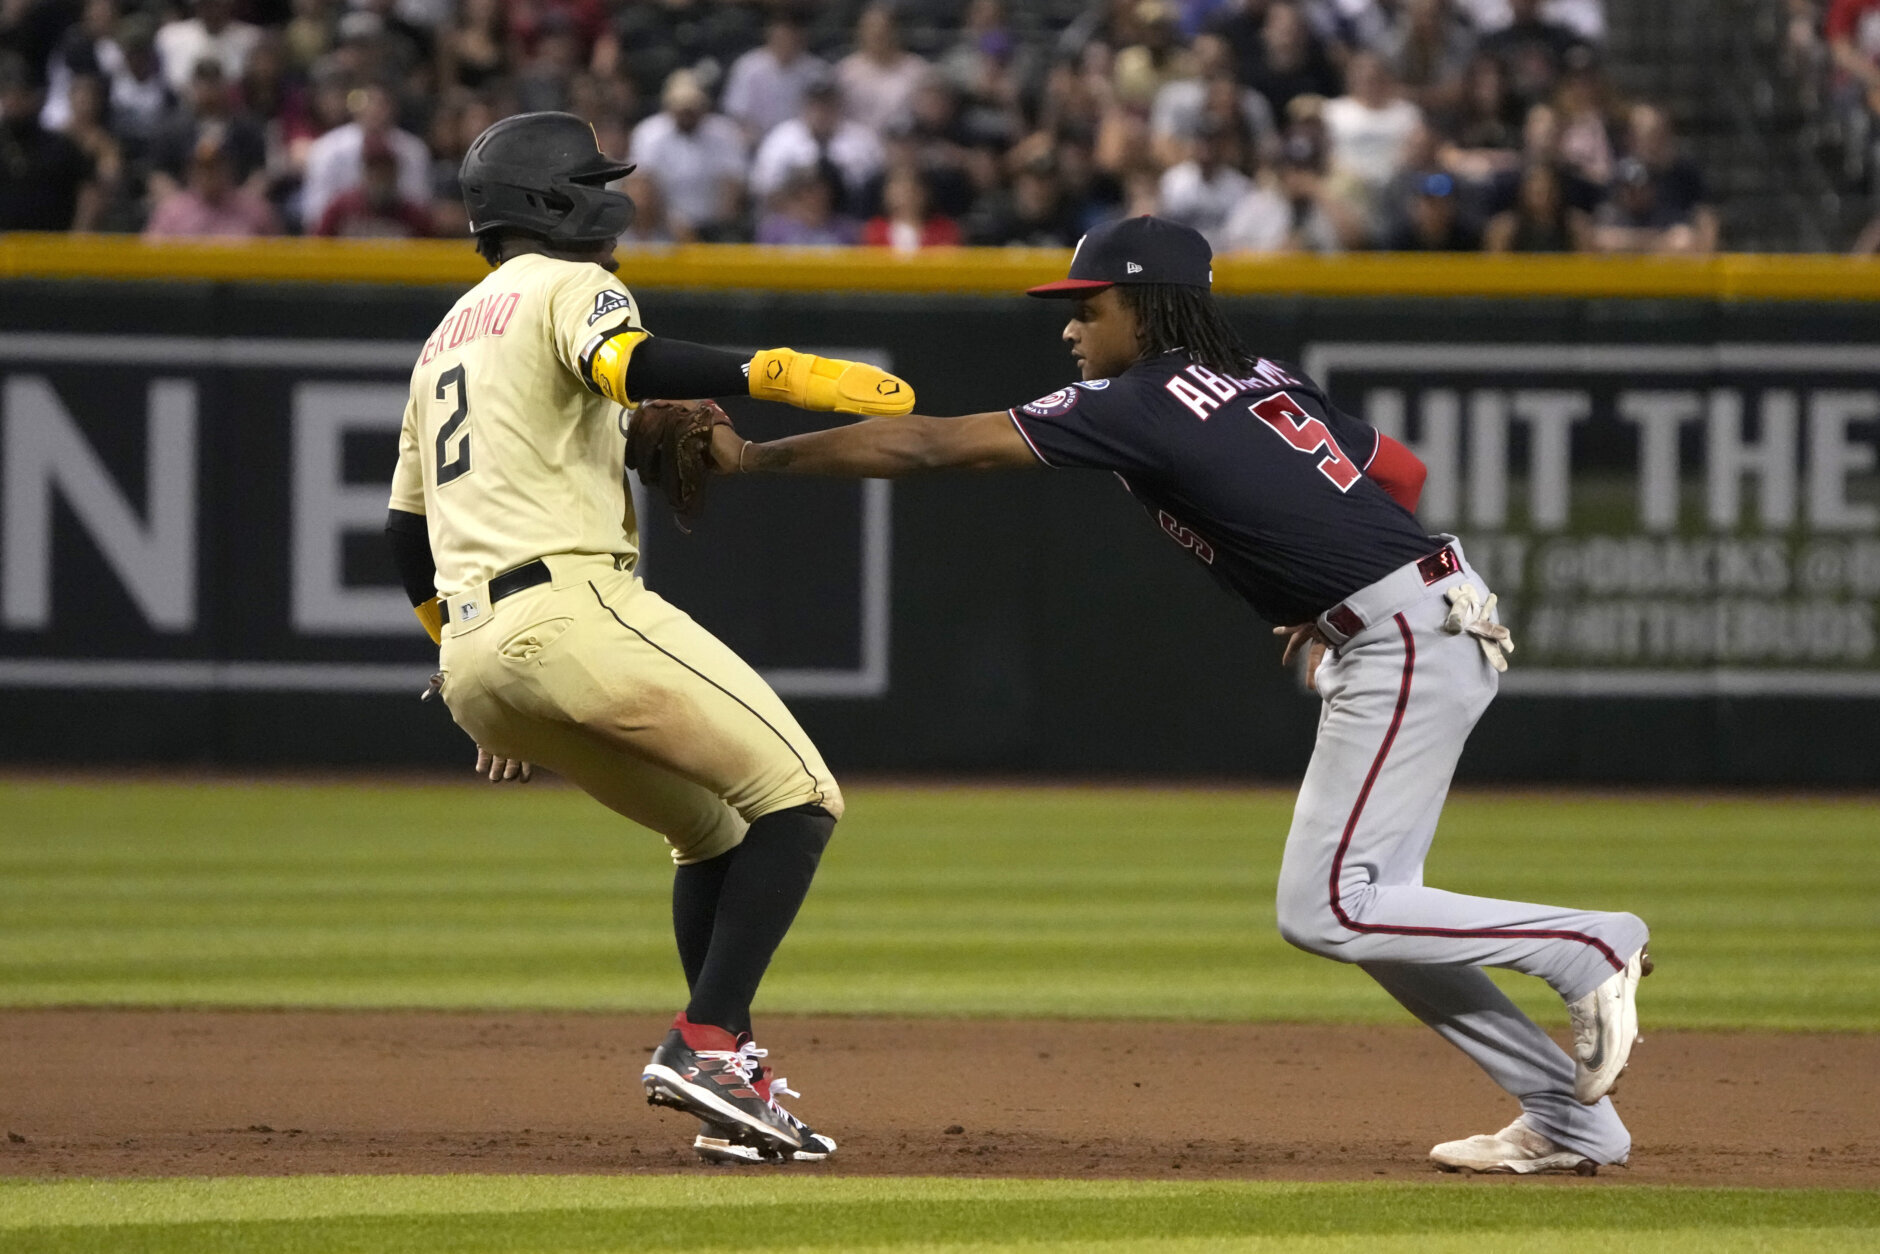 Arizona Diamondbacks' Geraldo Perdomo (2) is tagged out trying to steal secondbase by Washington Nationals shortstop CJ Abrams, right, in the fourth inning during a baseball game, Friday, May 5, 2023, in Phoenix. (AP Photo/Rick Scuteri)